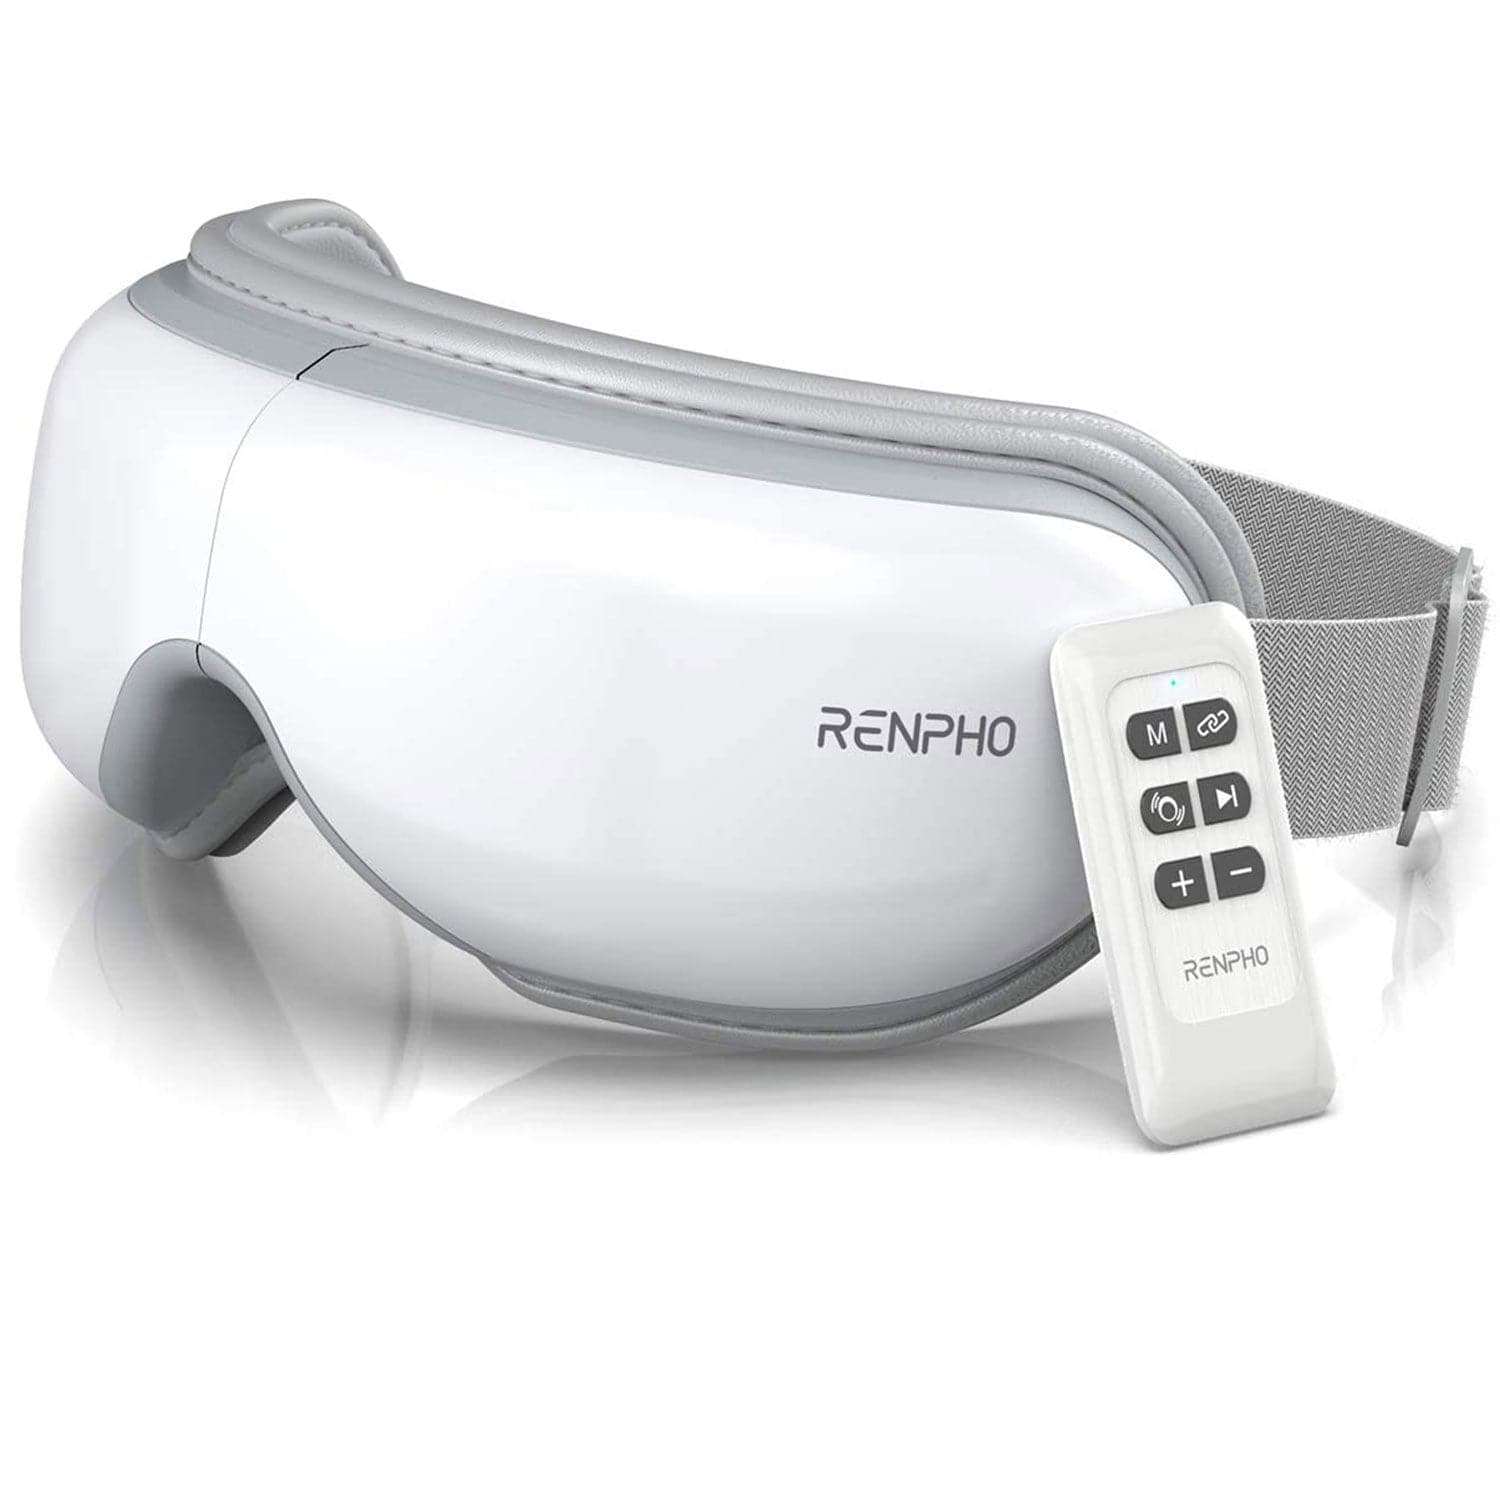 https://www.stylecraze.com/wp-content/uploads/product-images/renpho-eye-massager-with-heat-bluetooth-music-heated-massager-for-migraines-relax-and-reduce-eye-strain-dark-circles-eye-bags-dry-eye-improve-sleep-ideal-gifts-for-womenmen-a-white_afl2935.jpg